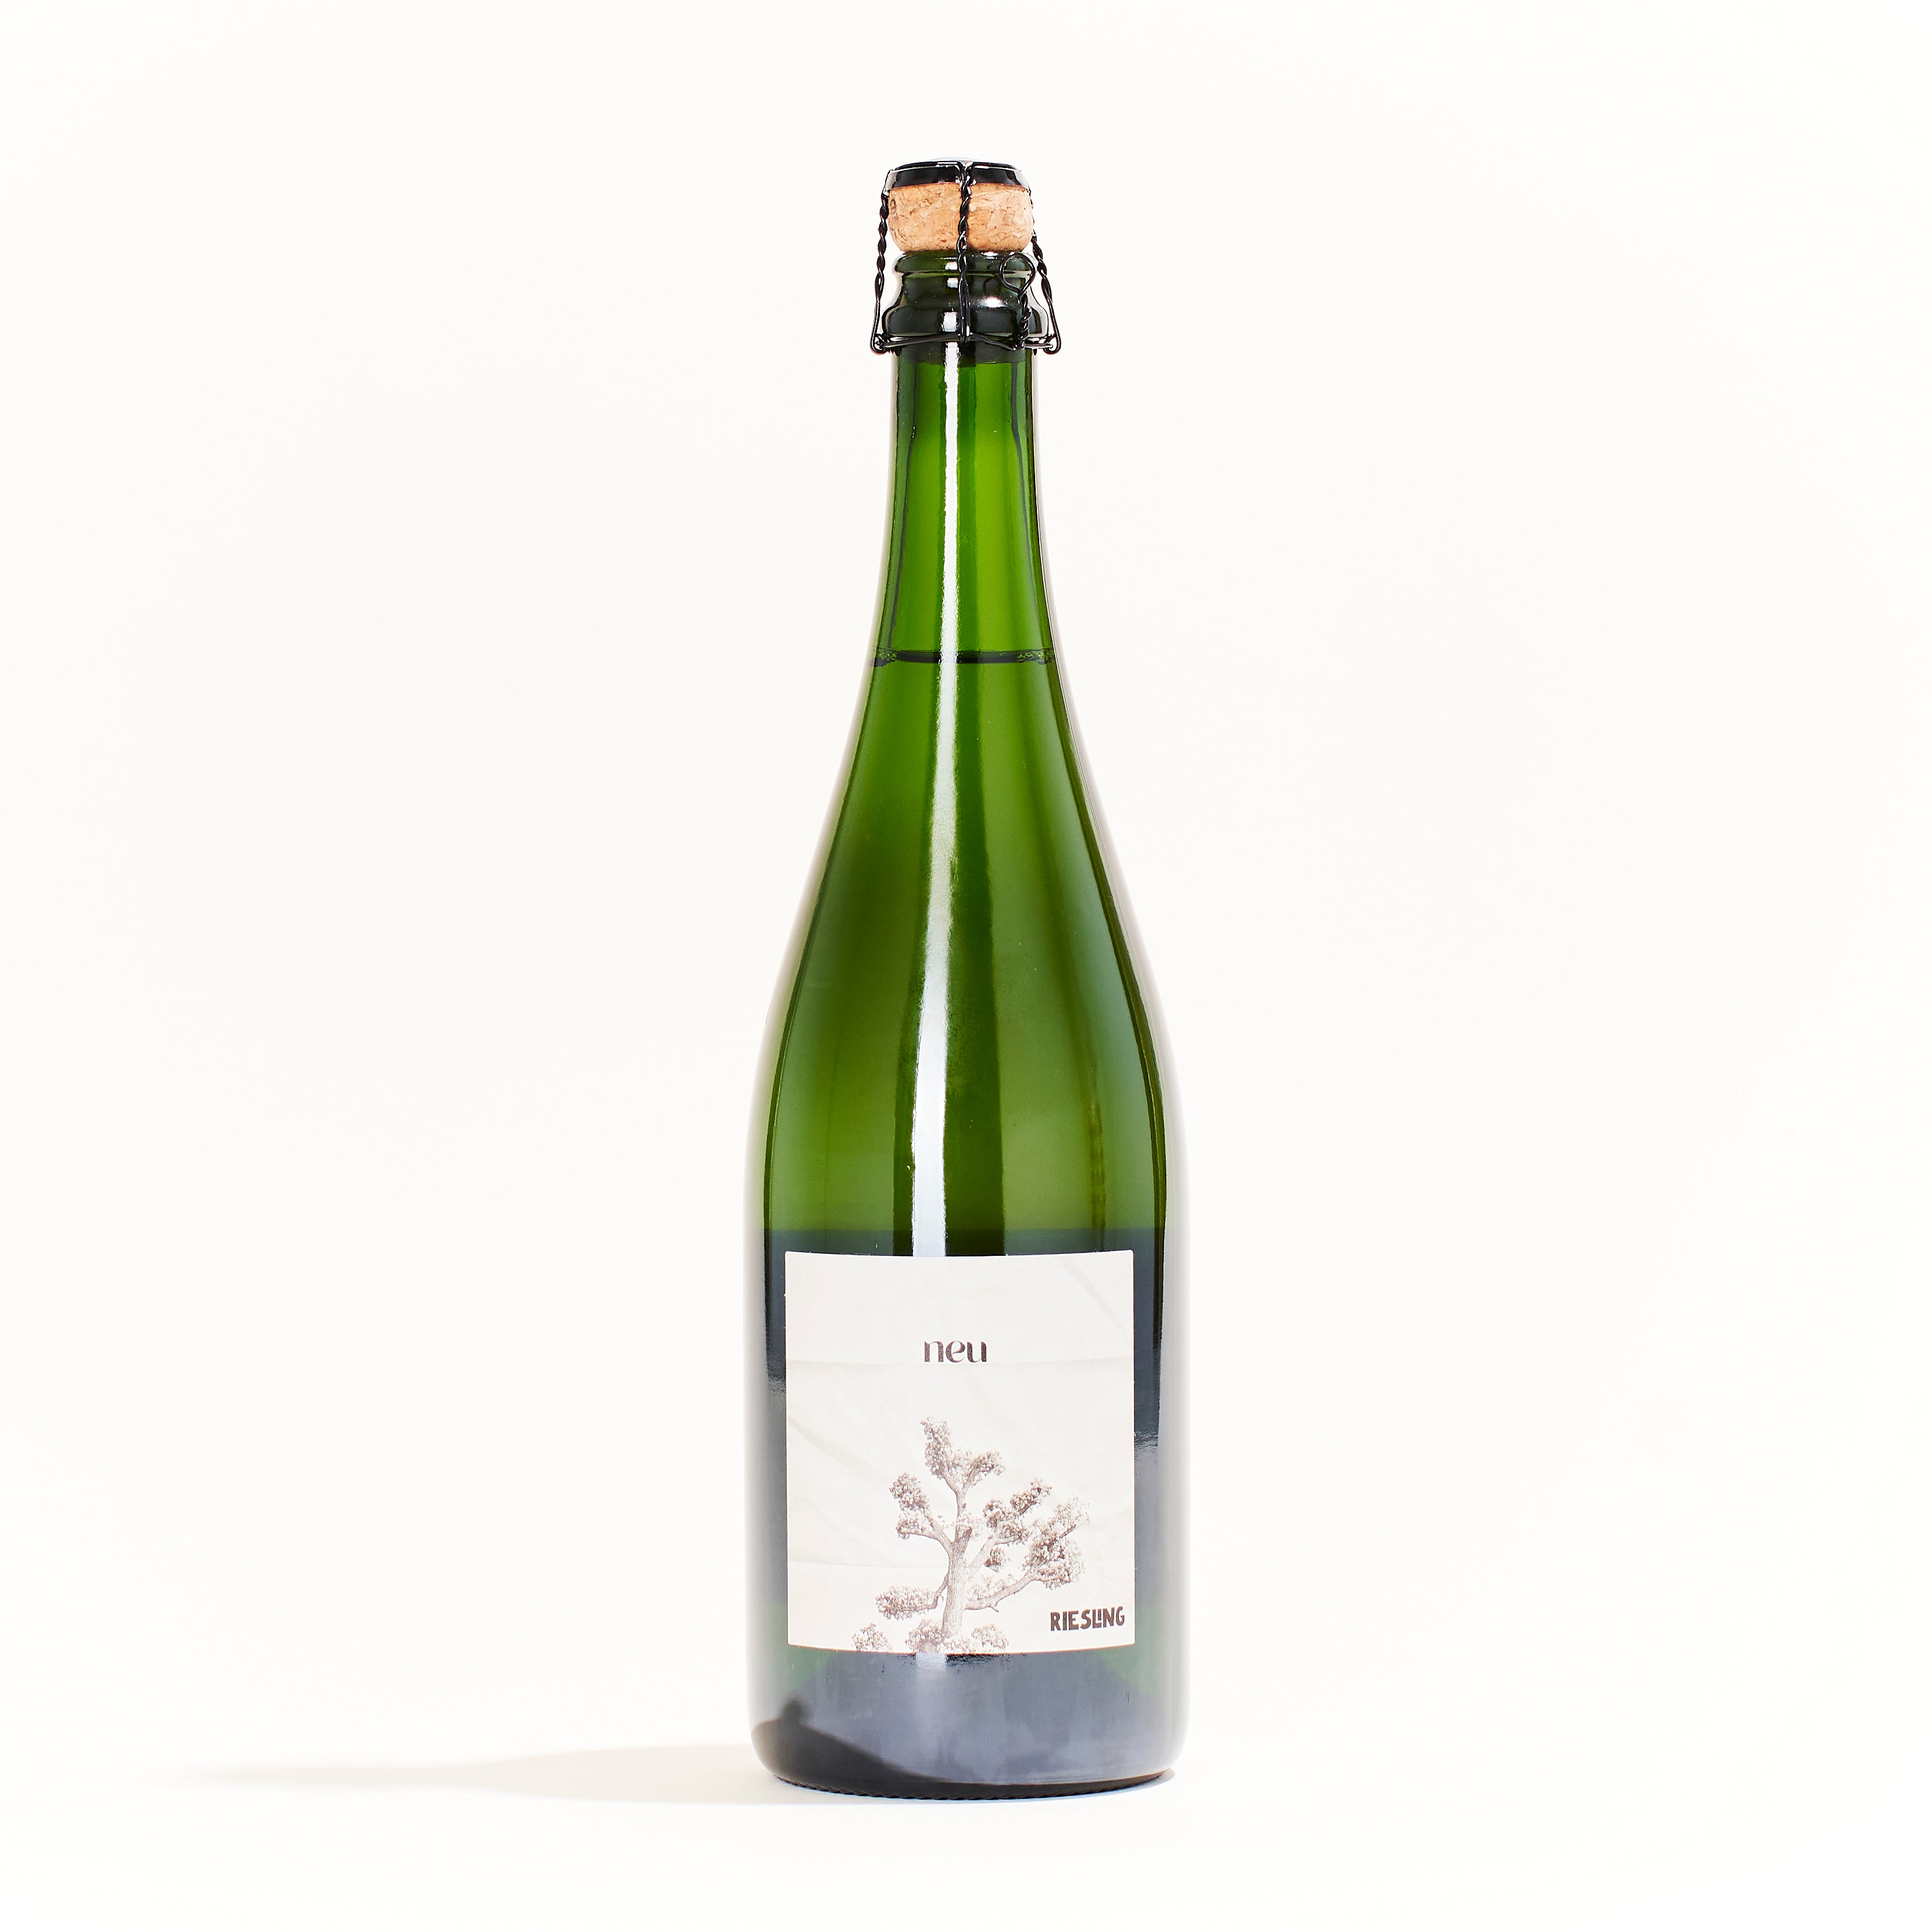 Sparkling Riesling bottle by Neu Cellars. Natural white wine from Michigan, USA. Made with Riesling grapes and minimal added sulfites. Available at MYSA Natural Wine.